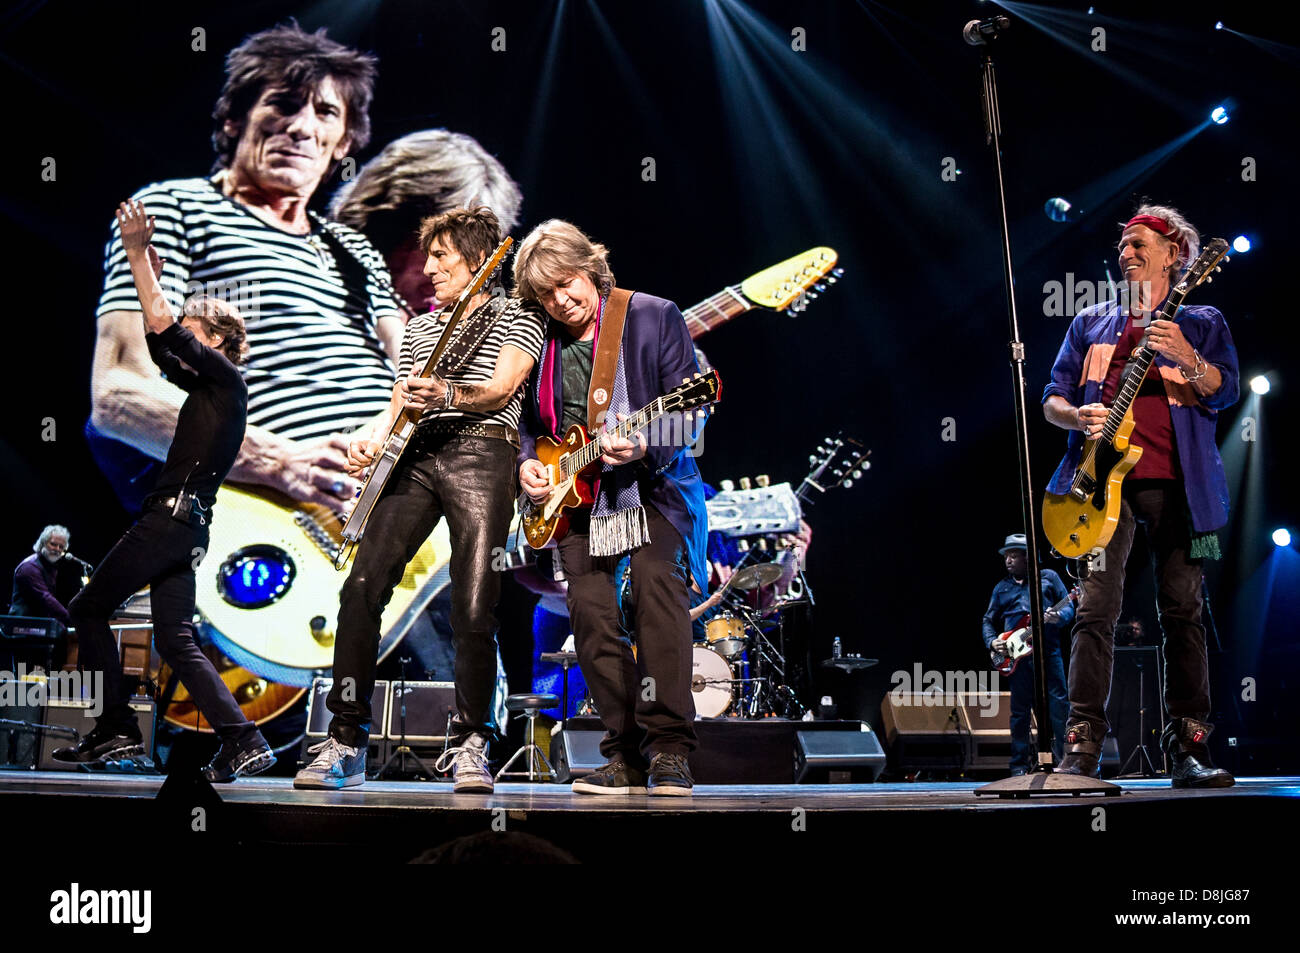 The Rolling Stones perform during their "50 and Counting" tour in Toronto,  Ontario, Canada. 05.25.13 Air Canada Centre Stock Photo - Alamy